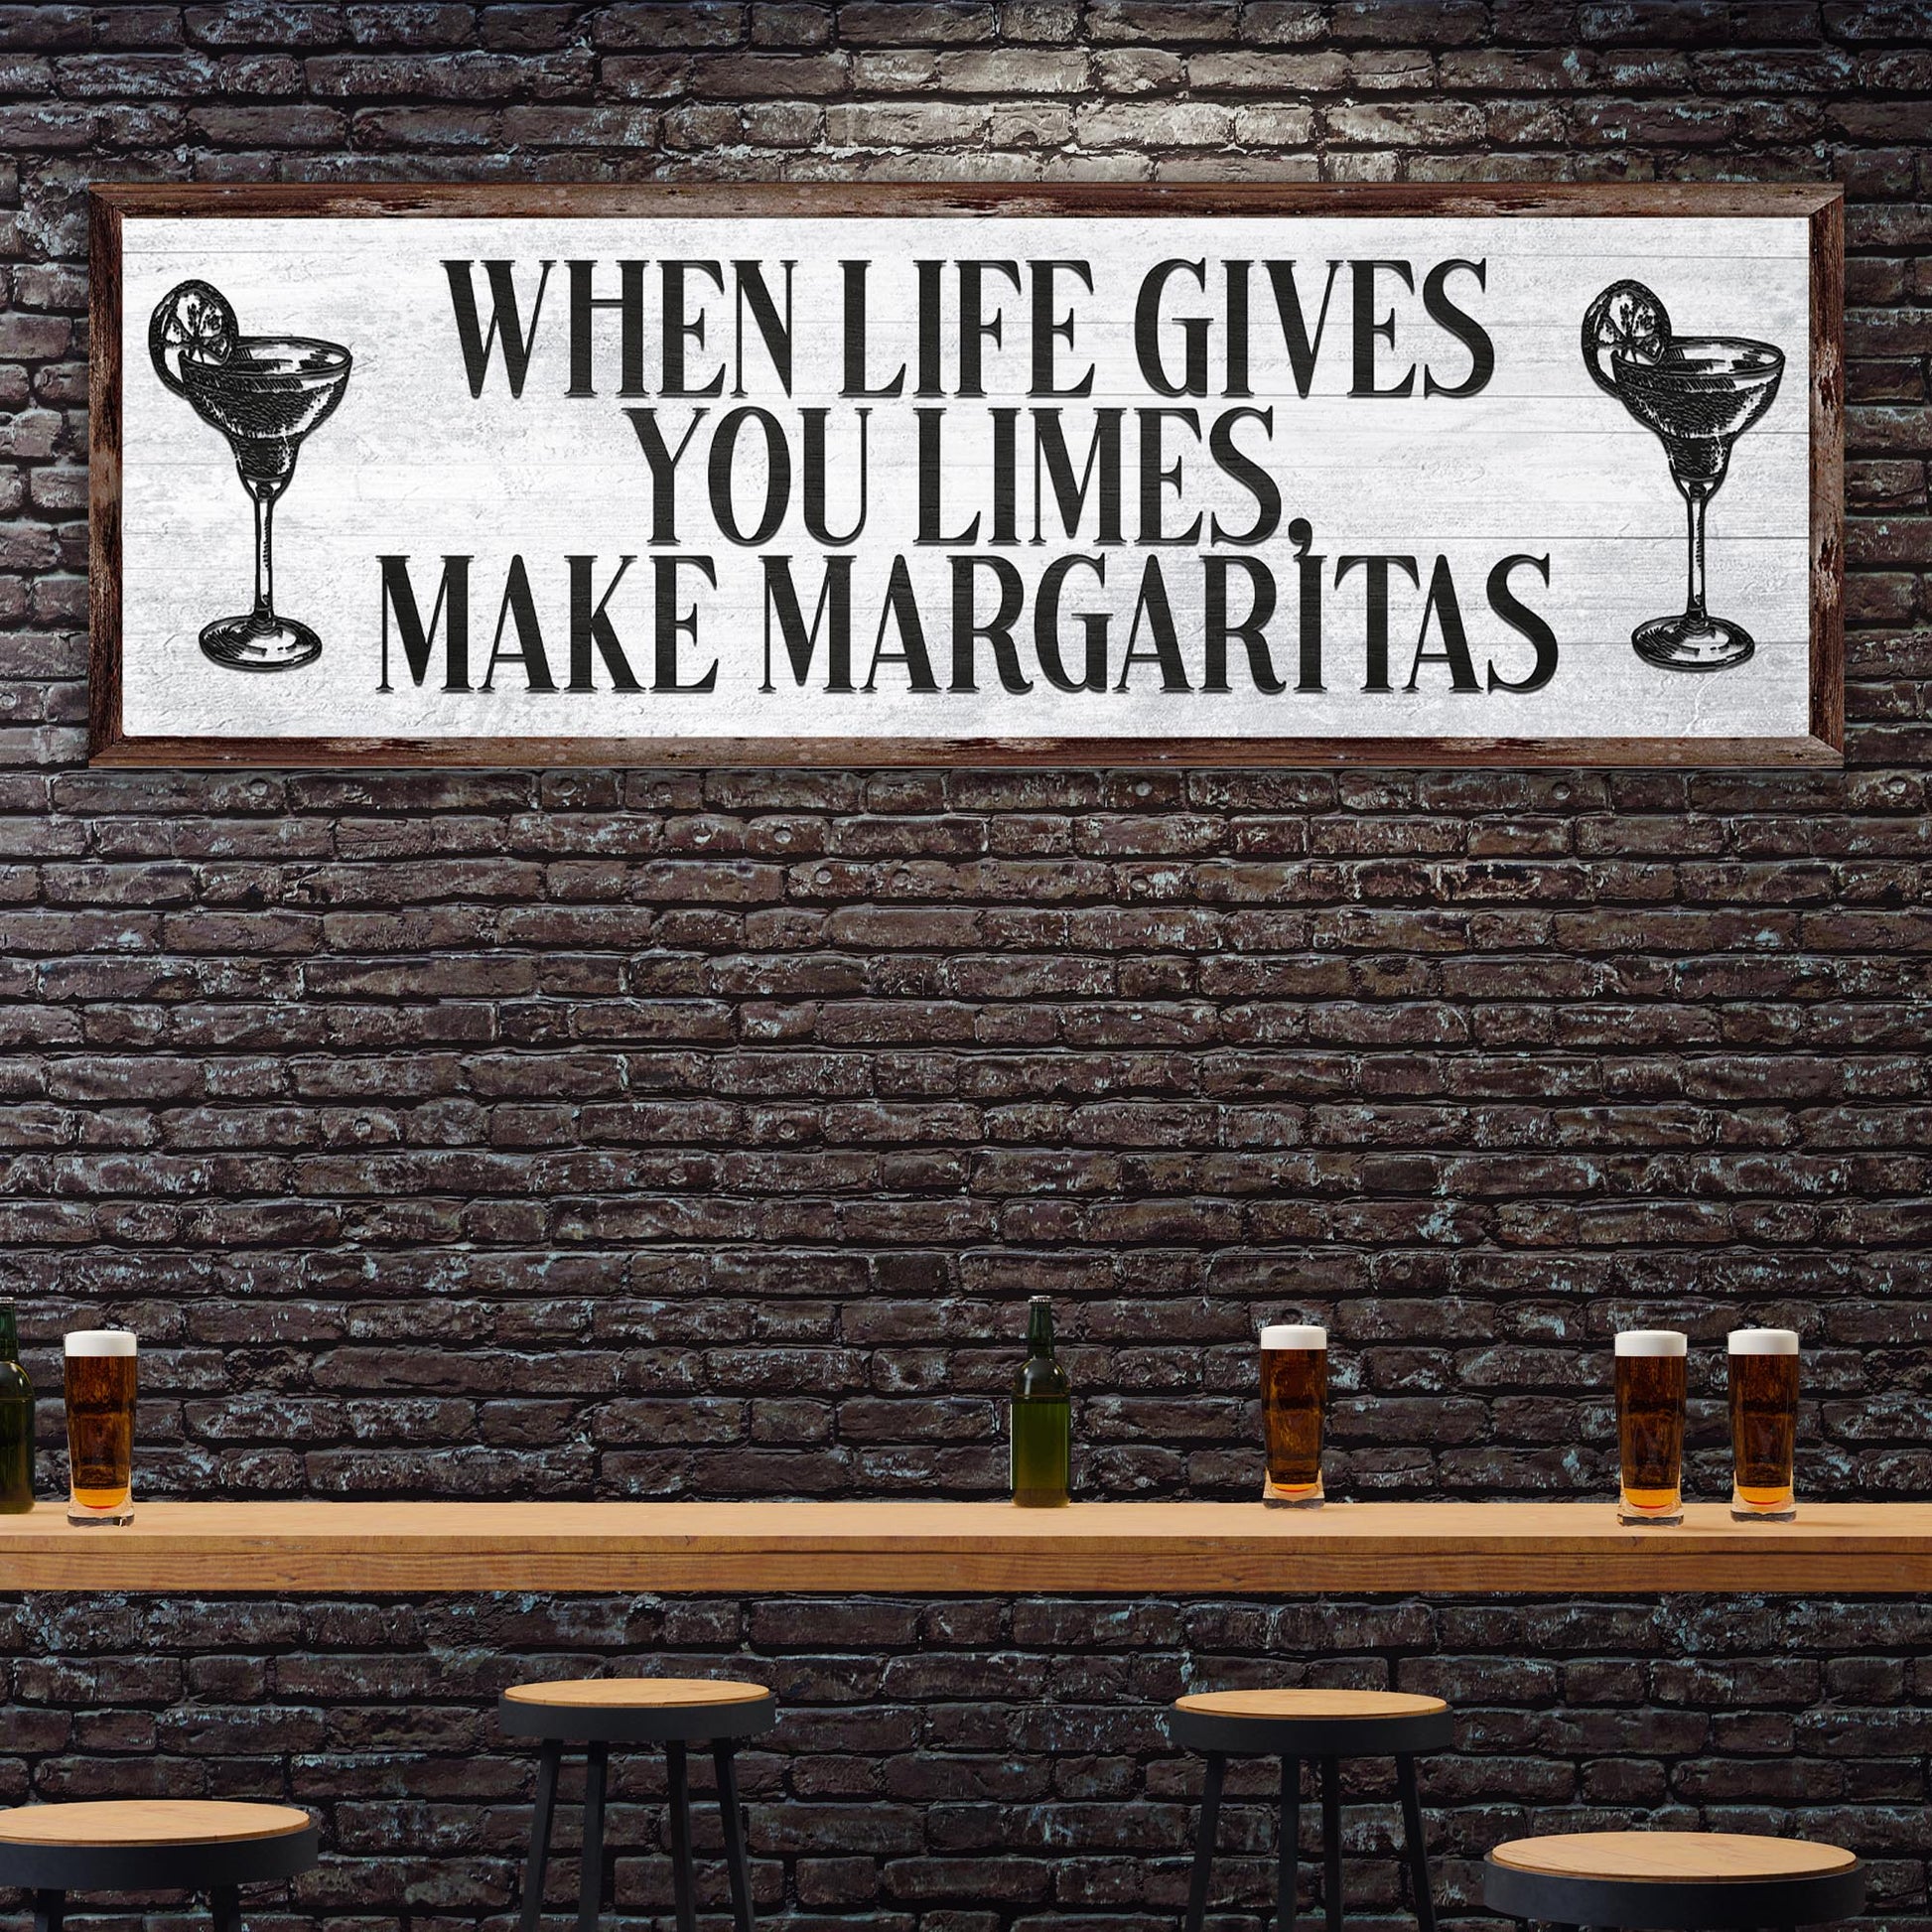 When Life Gives You Limes, Make Margaritas Sign - Image by Tailored Canvases